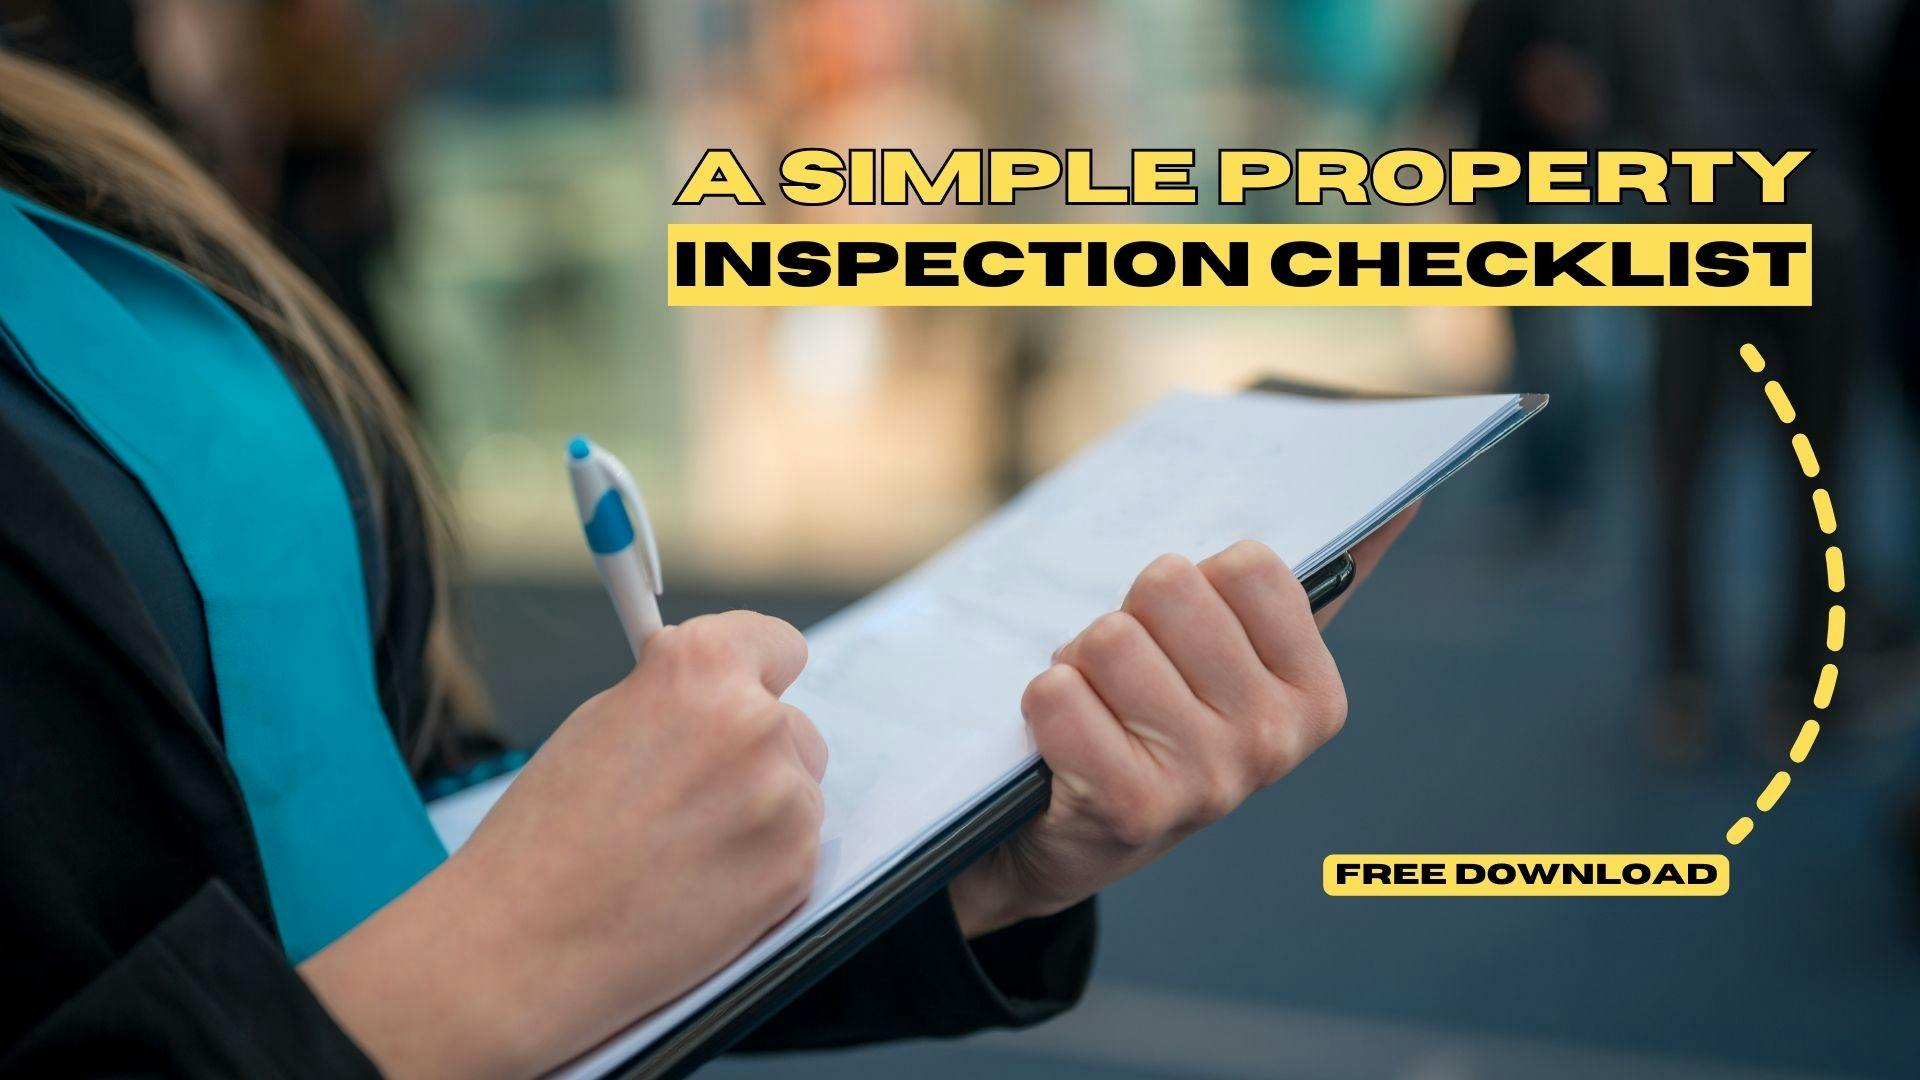 A Simple Property Inspection Checklist